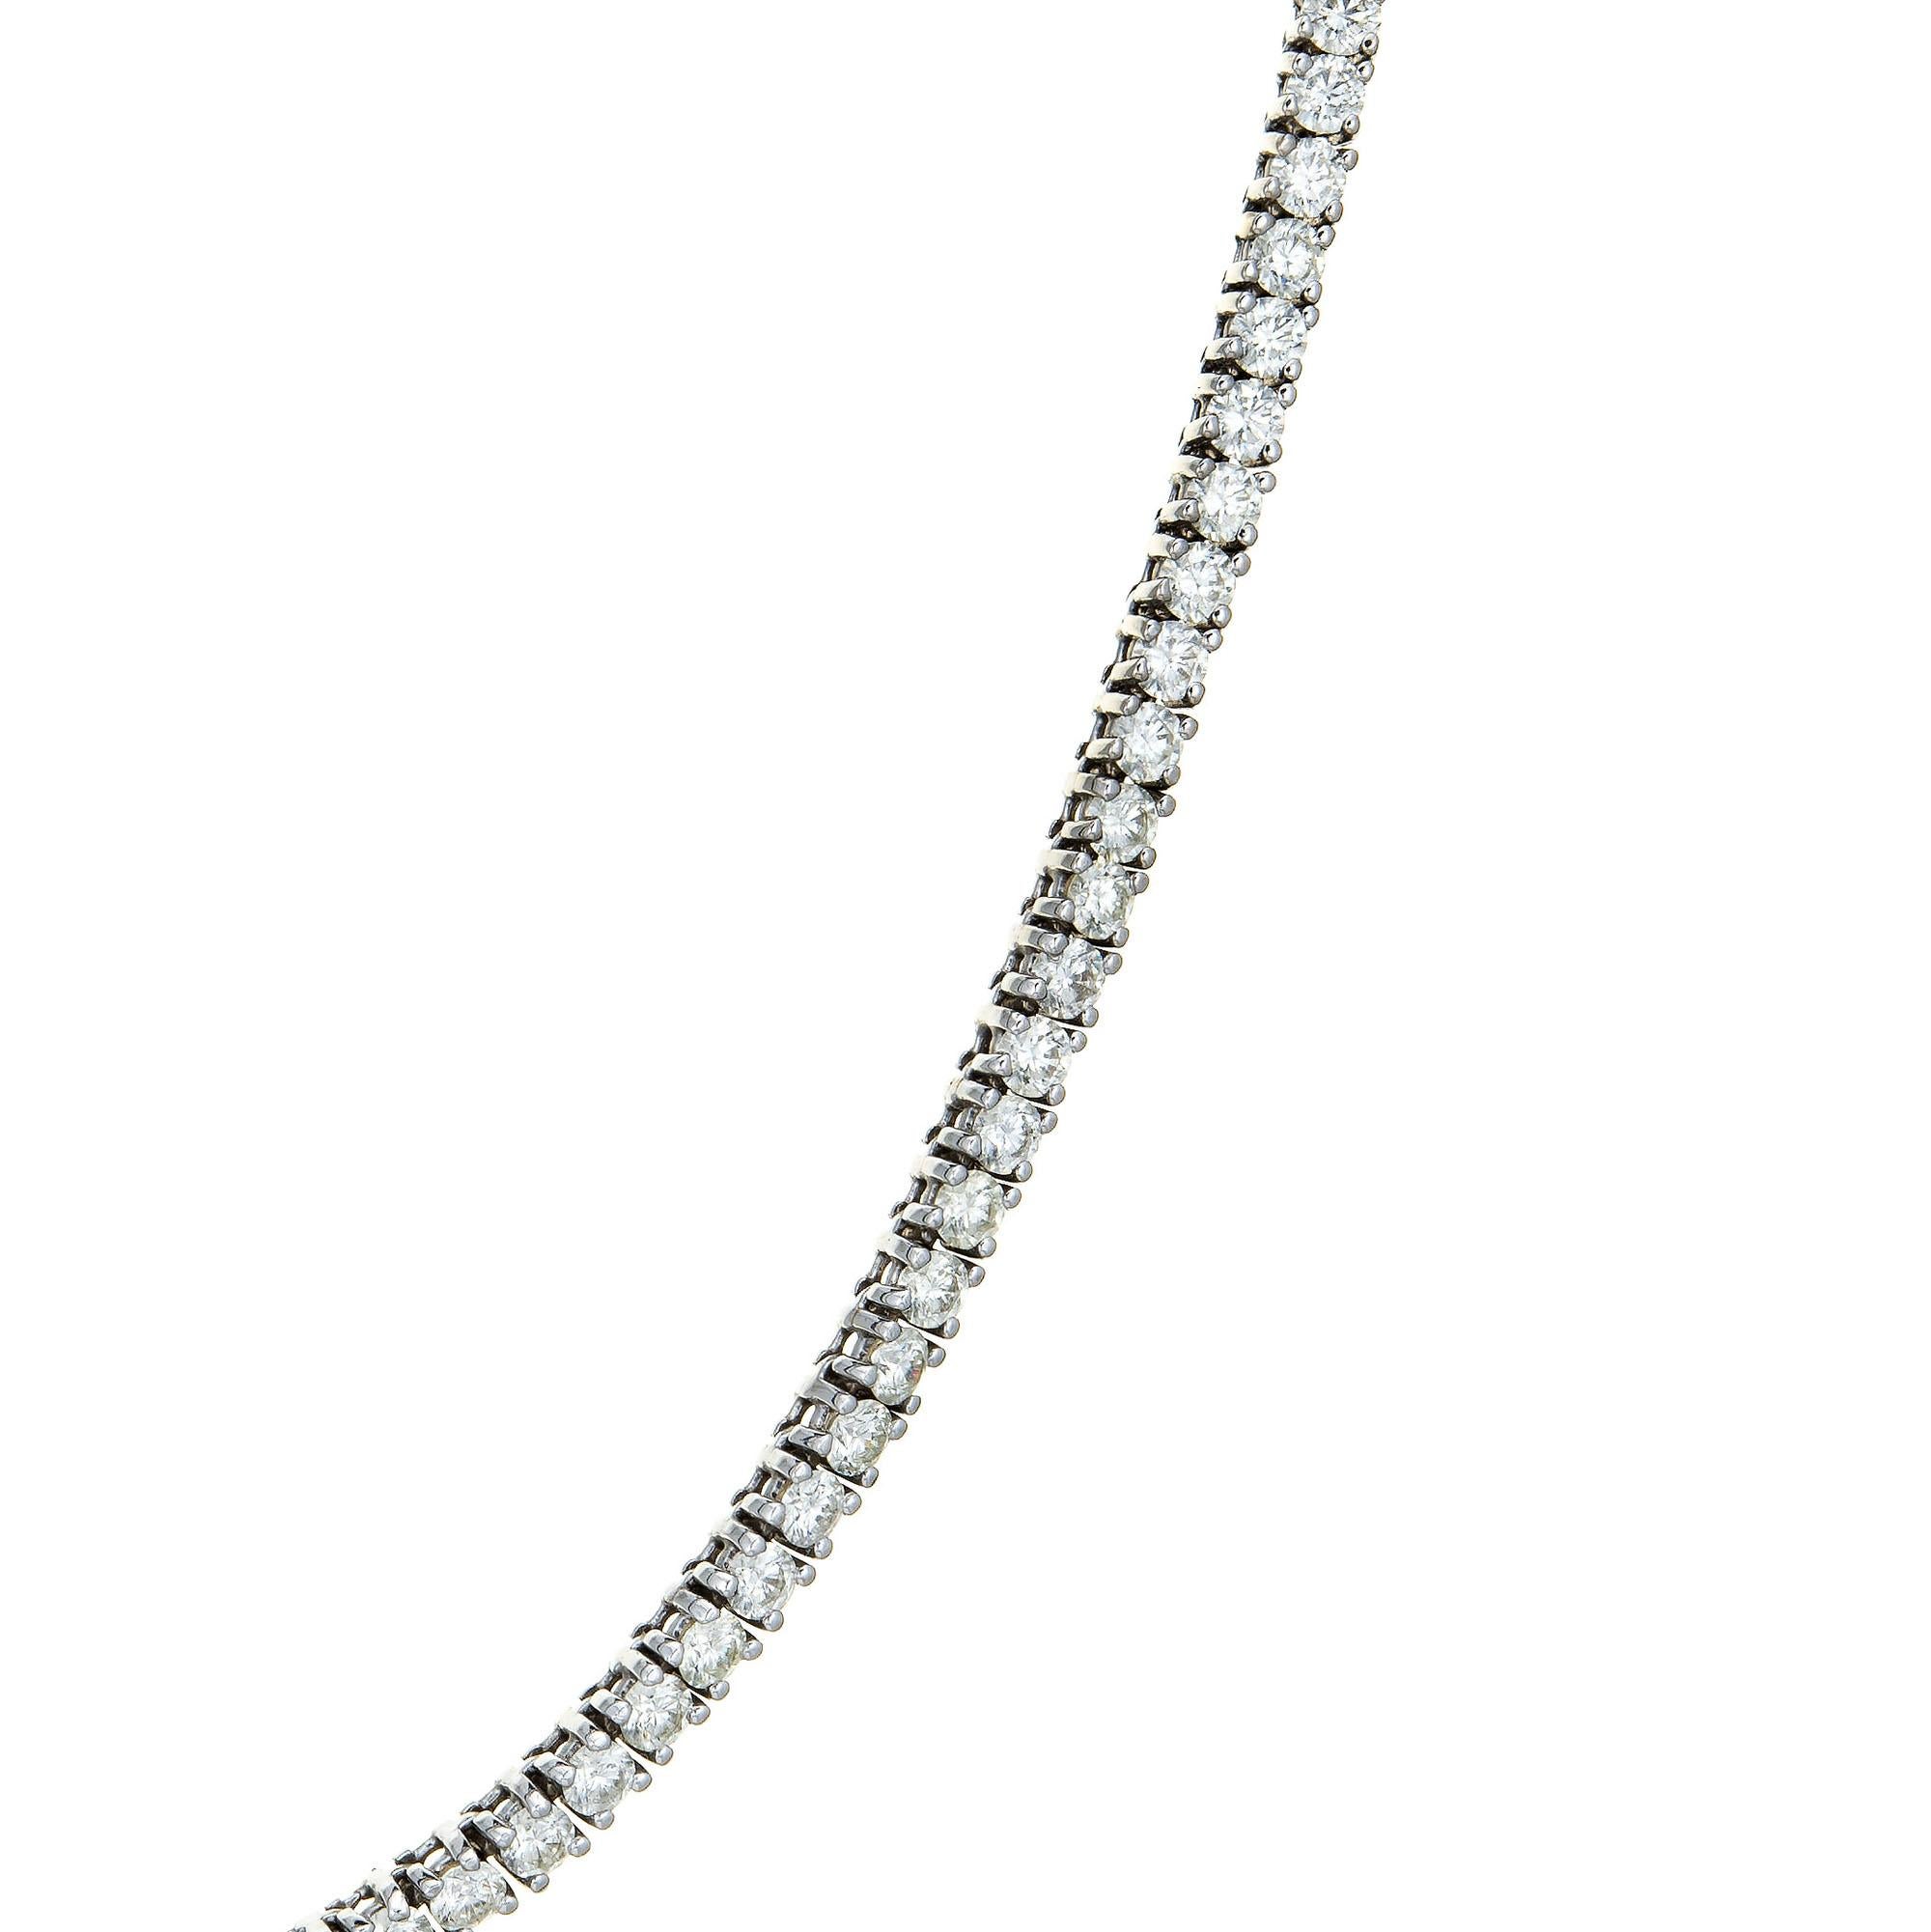 Stylish estate 18.50 carat diamond riviera necklace crafted in 14 karat white gold.  

Round brilliant cut diamonds total an estimated 18.50 carats (estimated at H-I color and SI2-SI2 clarity).

The standout necklace is set with full cut diamonds in